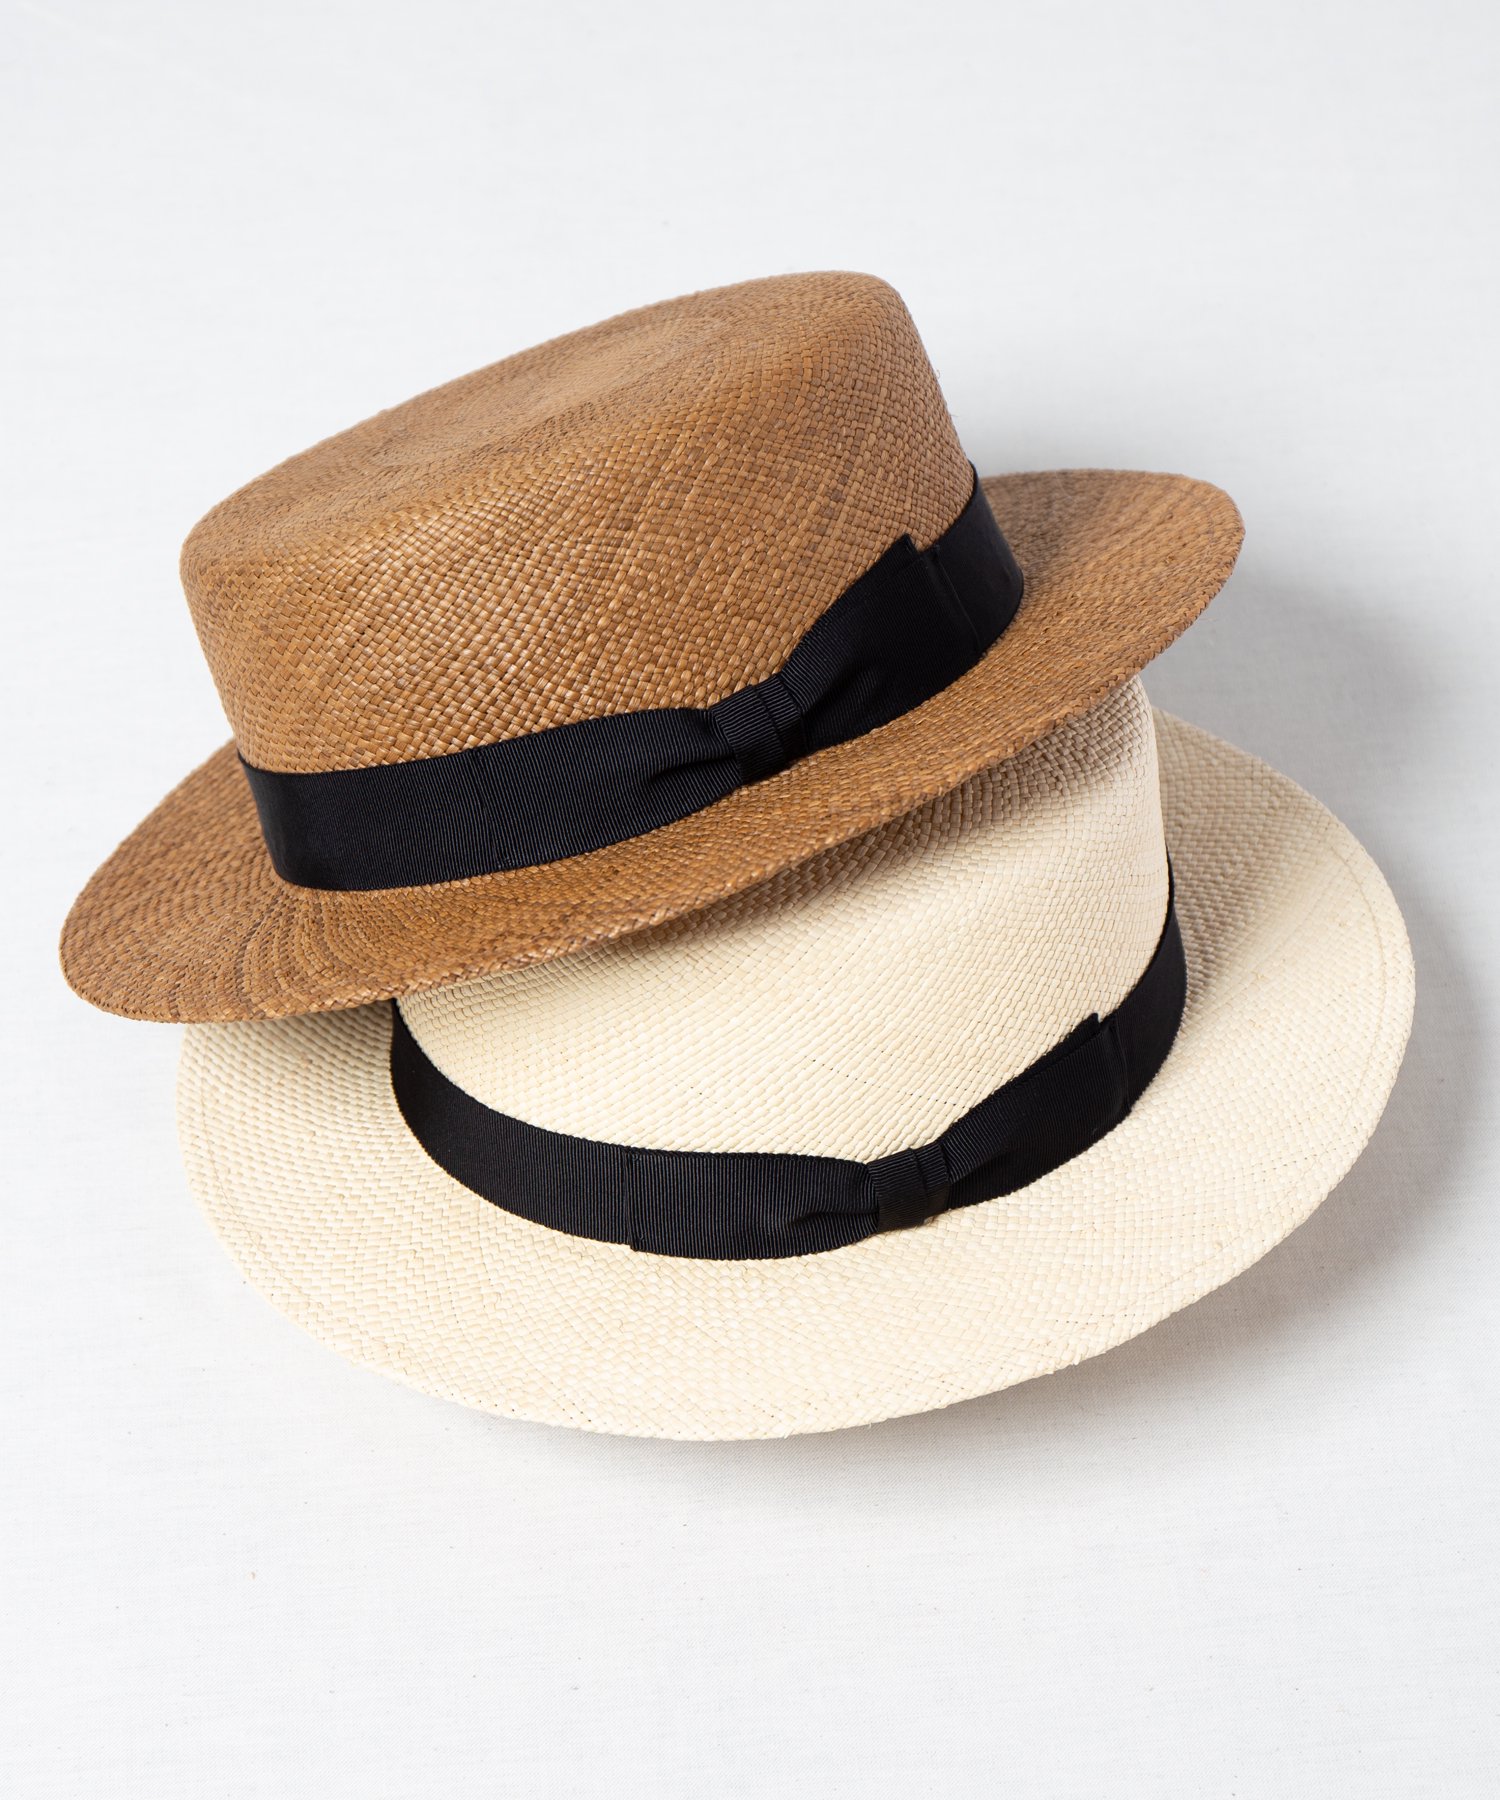 <img class='new_mark_img1' src='https://img.shop-pro.jp/img/new/icons20.gif' style='border:none;display:inline;margin:0px;padding:0px;width:auto;' />【Racal】  Panama Boater Hat / パナマ ボーター ハット　カンカン帽